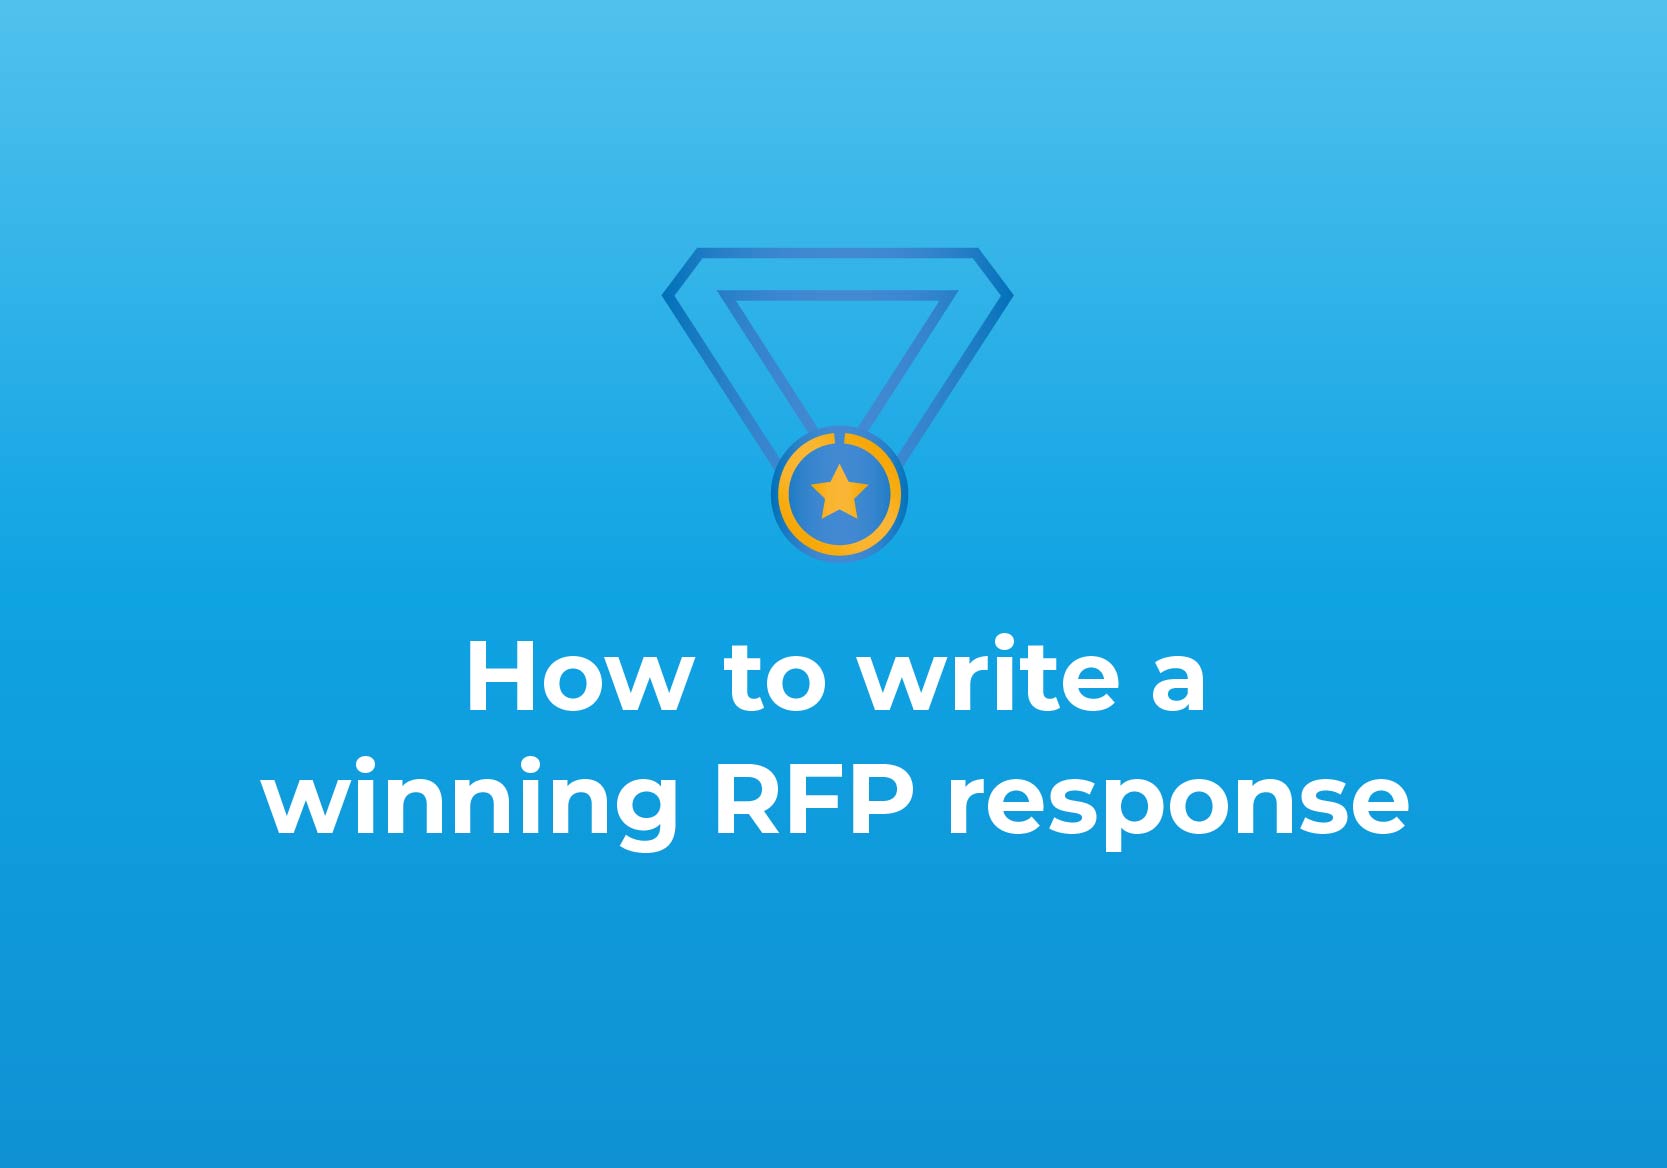 How to Write a Winning RFP Response: Best Practices - RFP11